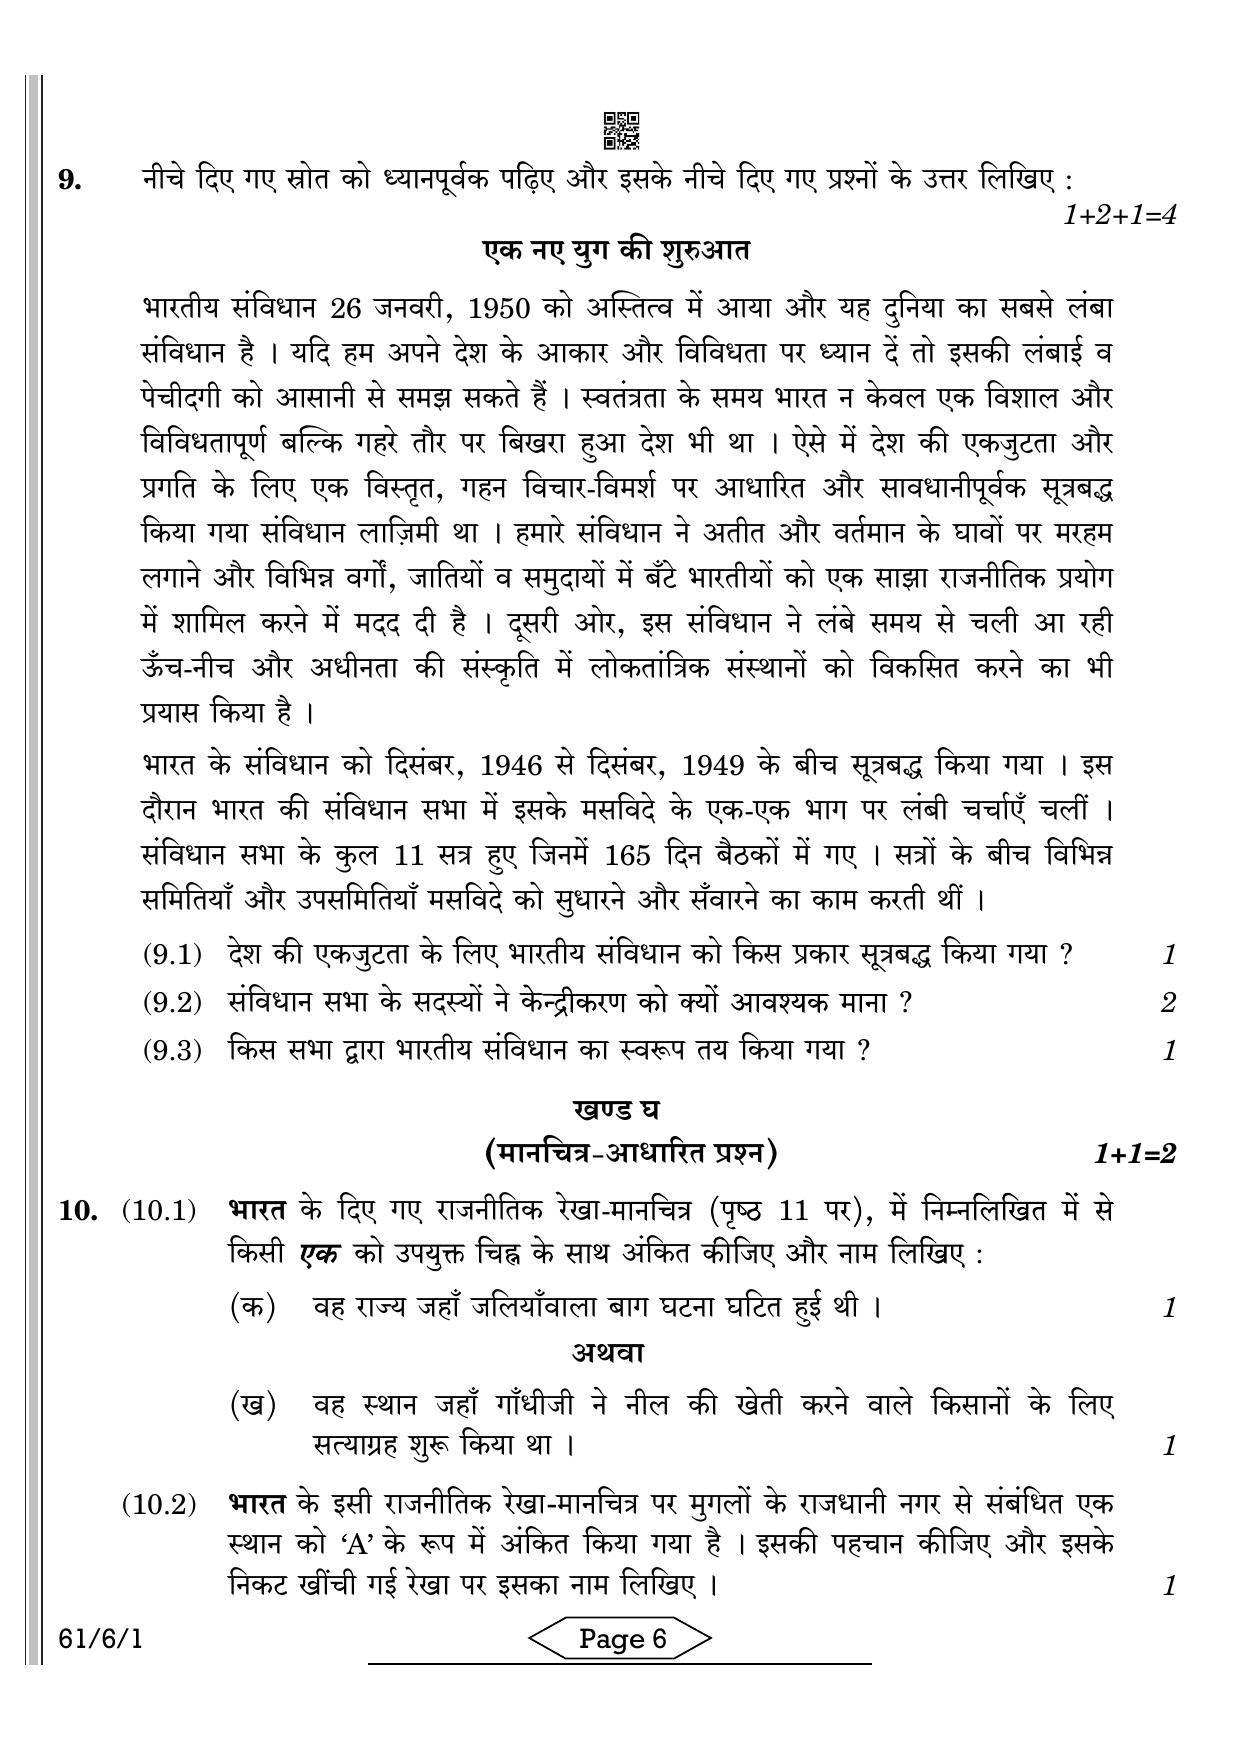 CBSE Class 12 61-6-1 HISTORY 2022 Compartment Question Paper - Page 6